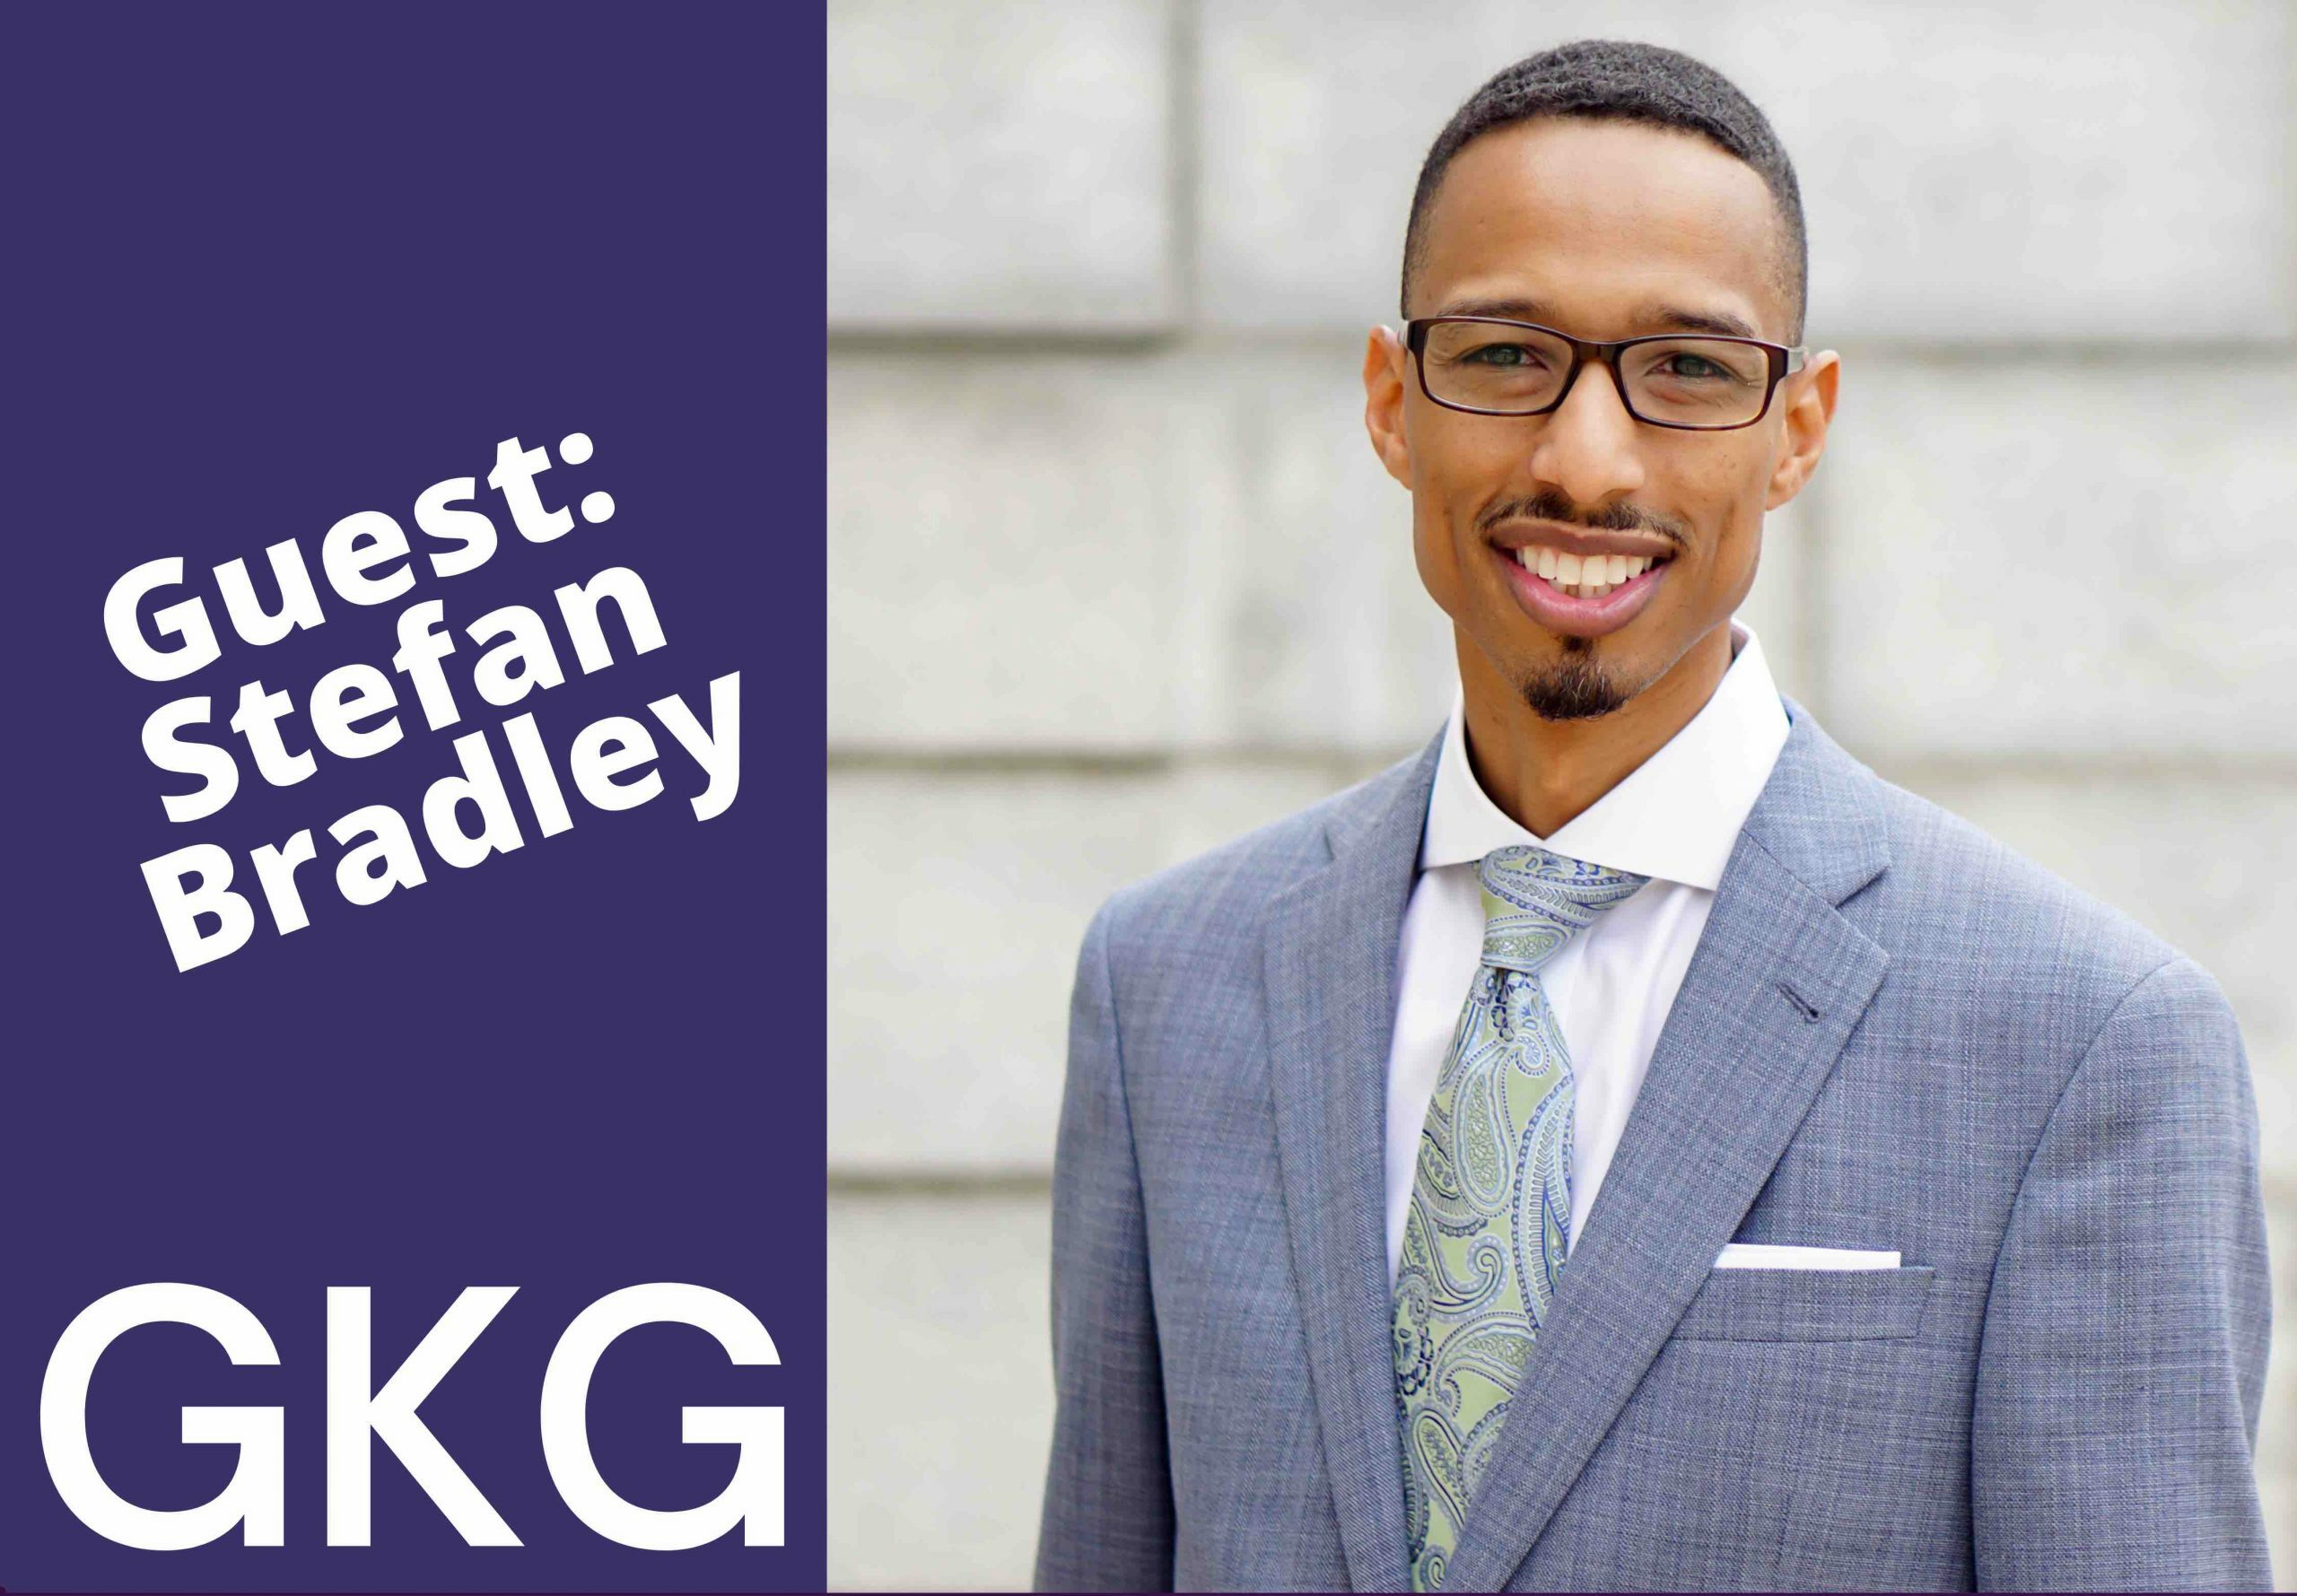 Promotional image featuring a smiling man in a suit with text labels "guest: Stefan Bradley" and "Professional Consulting Services" on a gray background.